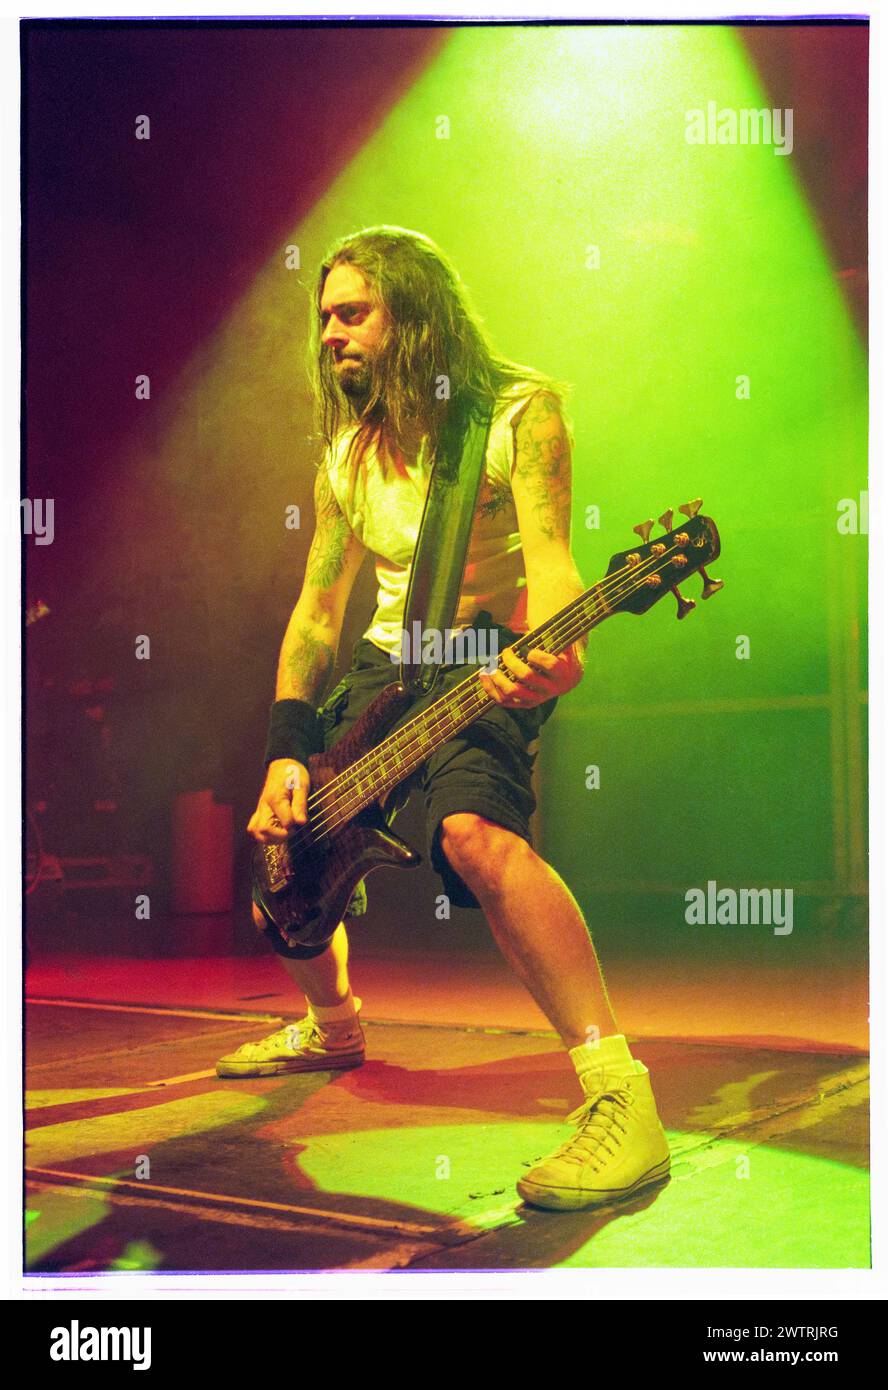 REX BROWN, PANTERA, 2000: Rex Brown gbass player with Pantera playing live on one of the last tours with the band's classic lineup at Newport Centre in Newport, Wales, UK on 24 April 2000. Photograph: Rob Watkins.  INFO: The legendary American heavy metal band Pantera formed in 1981 in Arlington, Texas. In 2000 they were touring with their ninth and final studio album ‘Reinventing the Steel’. Stock Photo